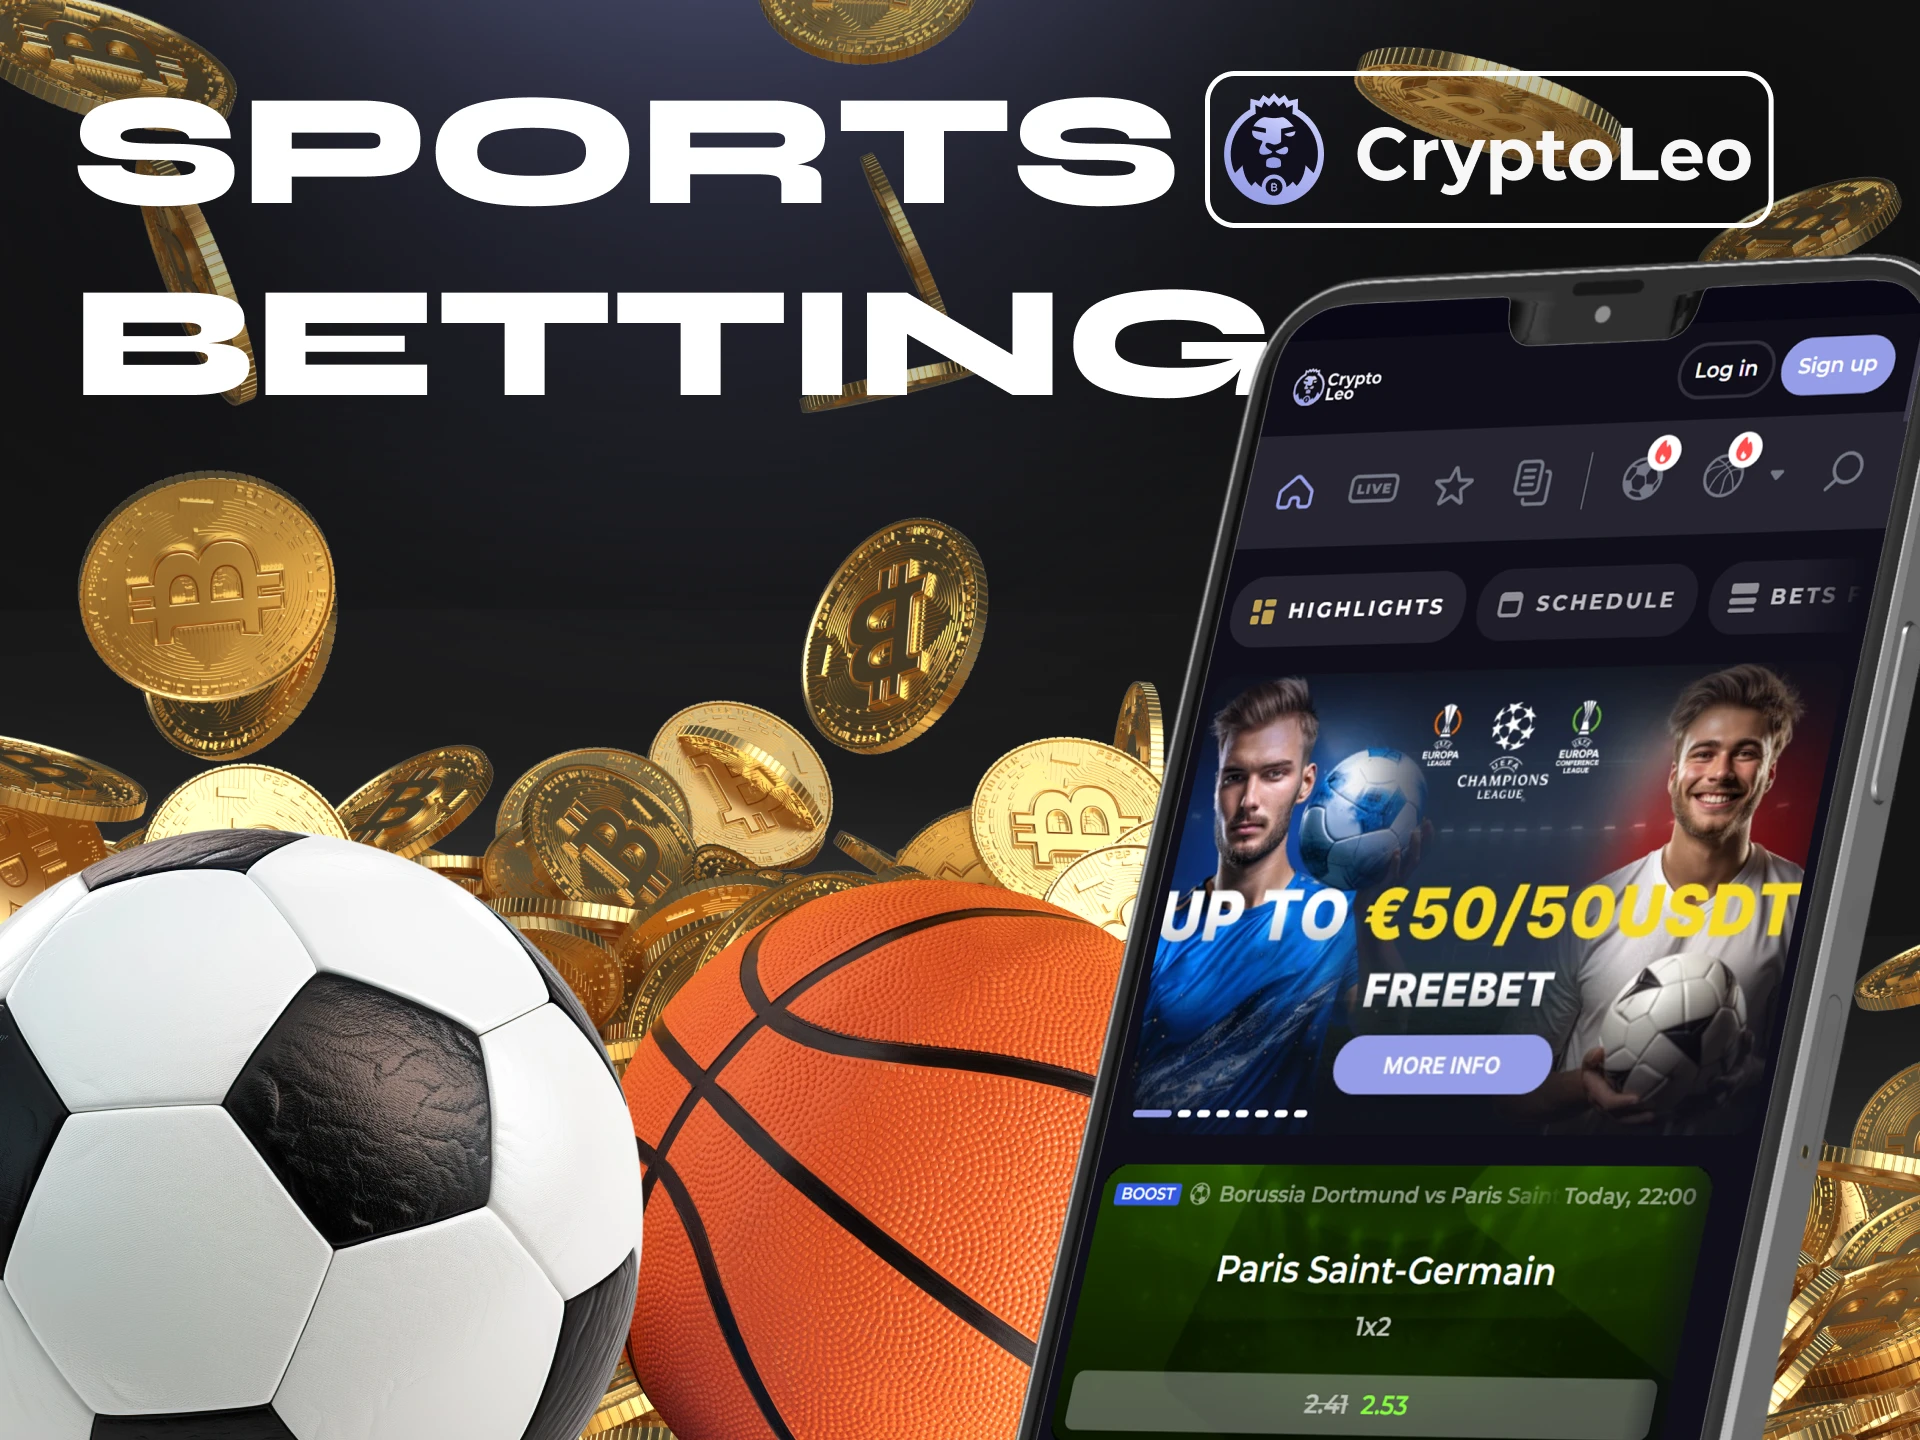 The Cryptoleo app offers good odds for sports betting.